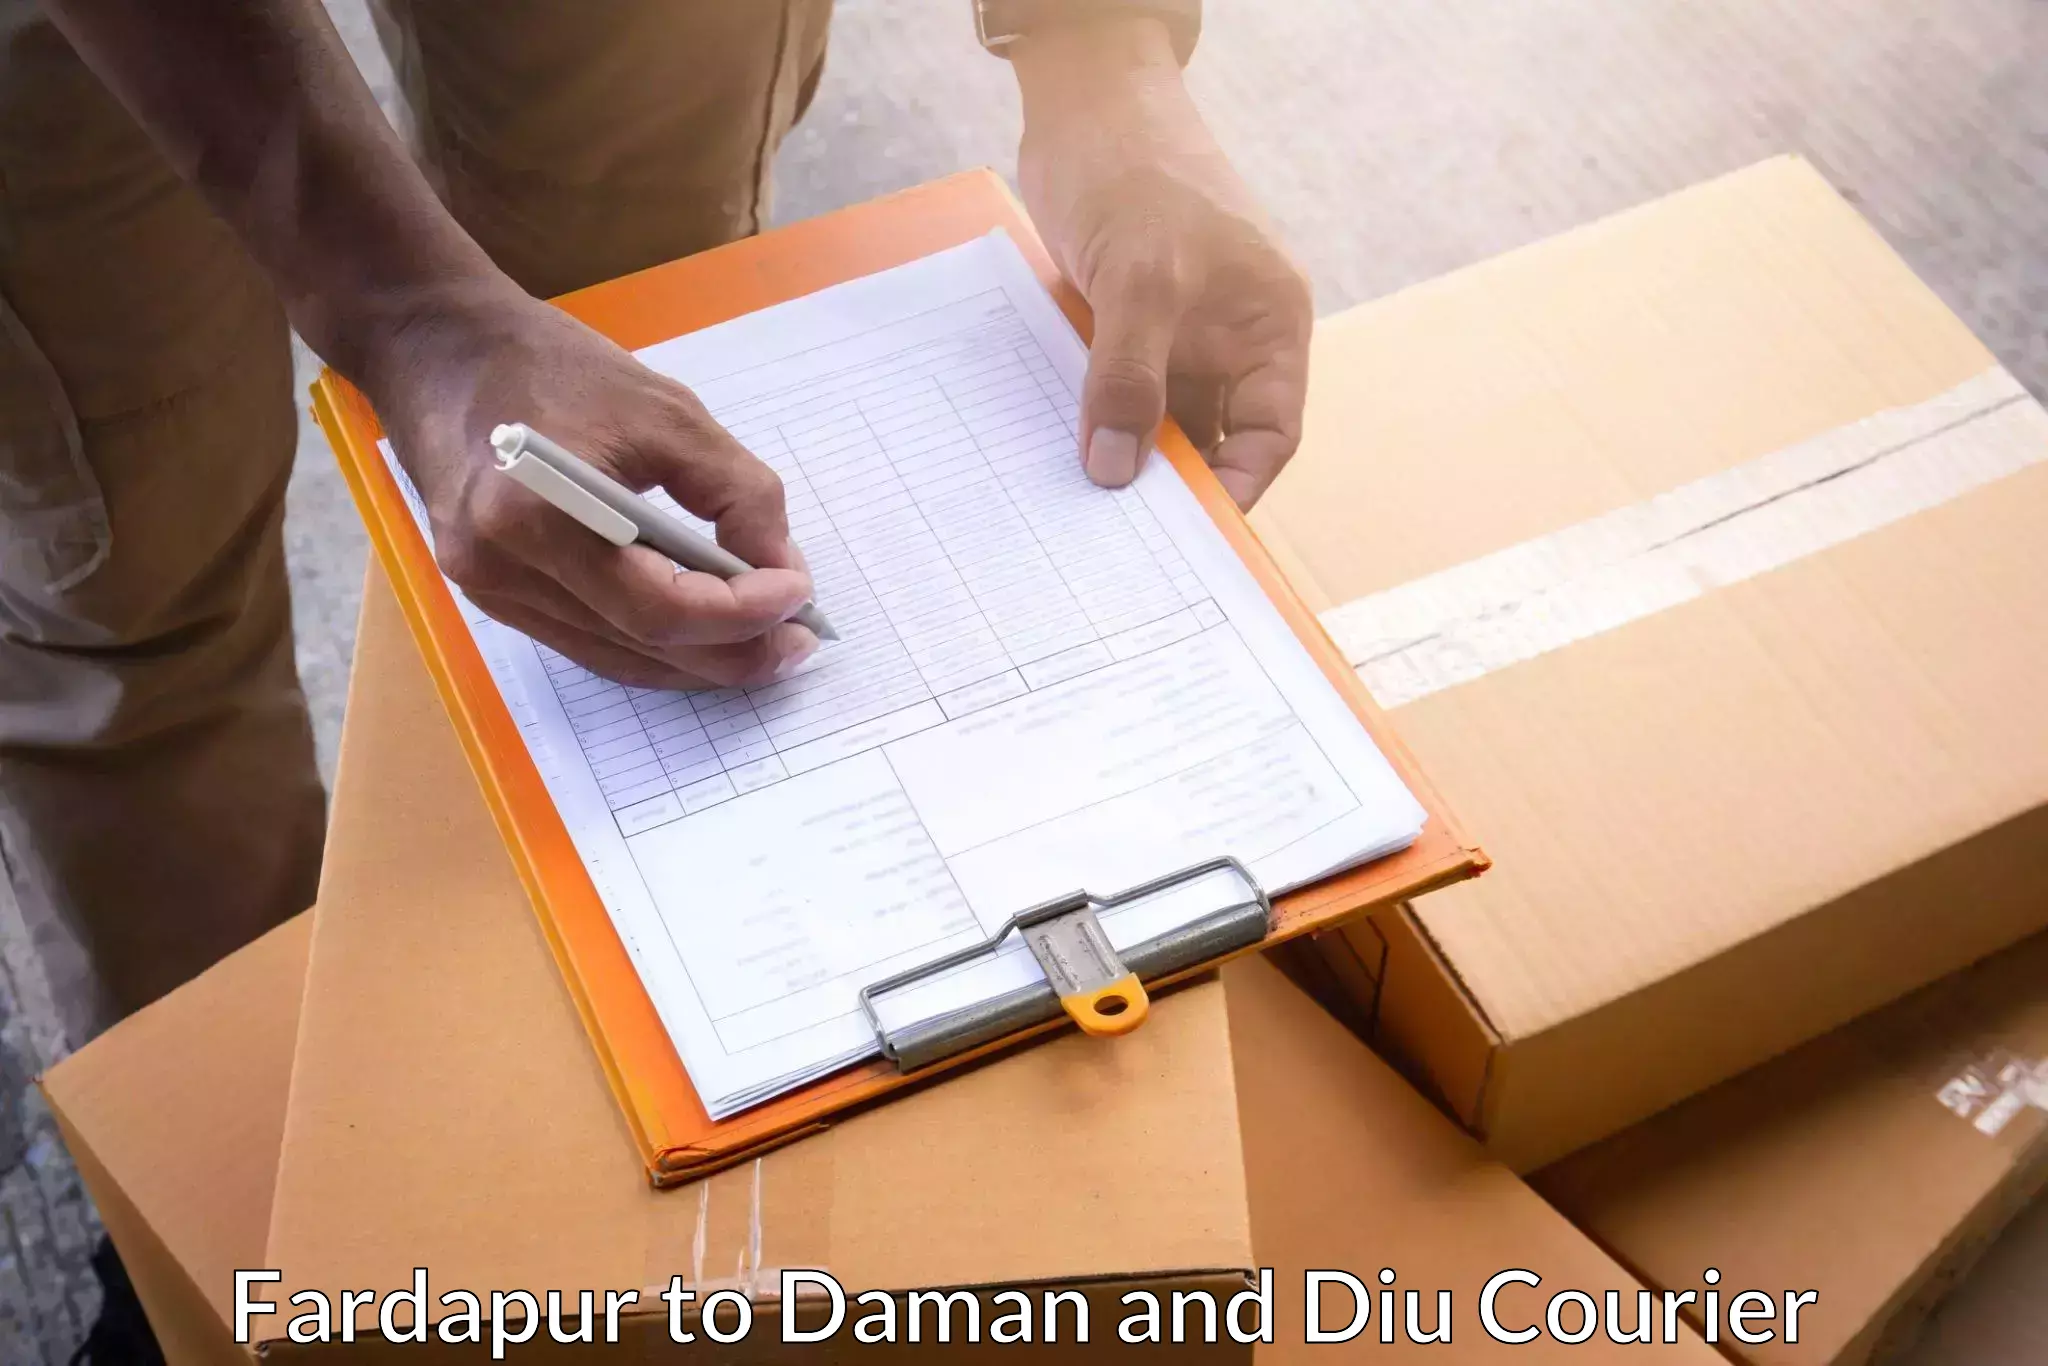 Enhanced delivery experience Fardapur to Daman and Diu